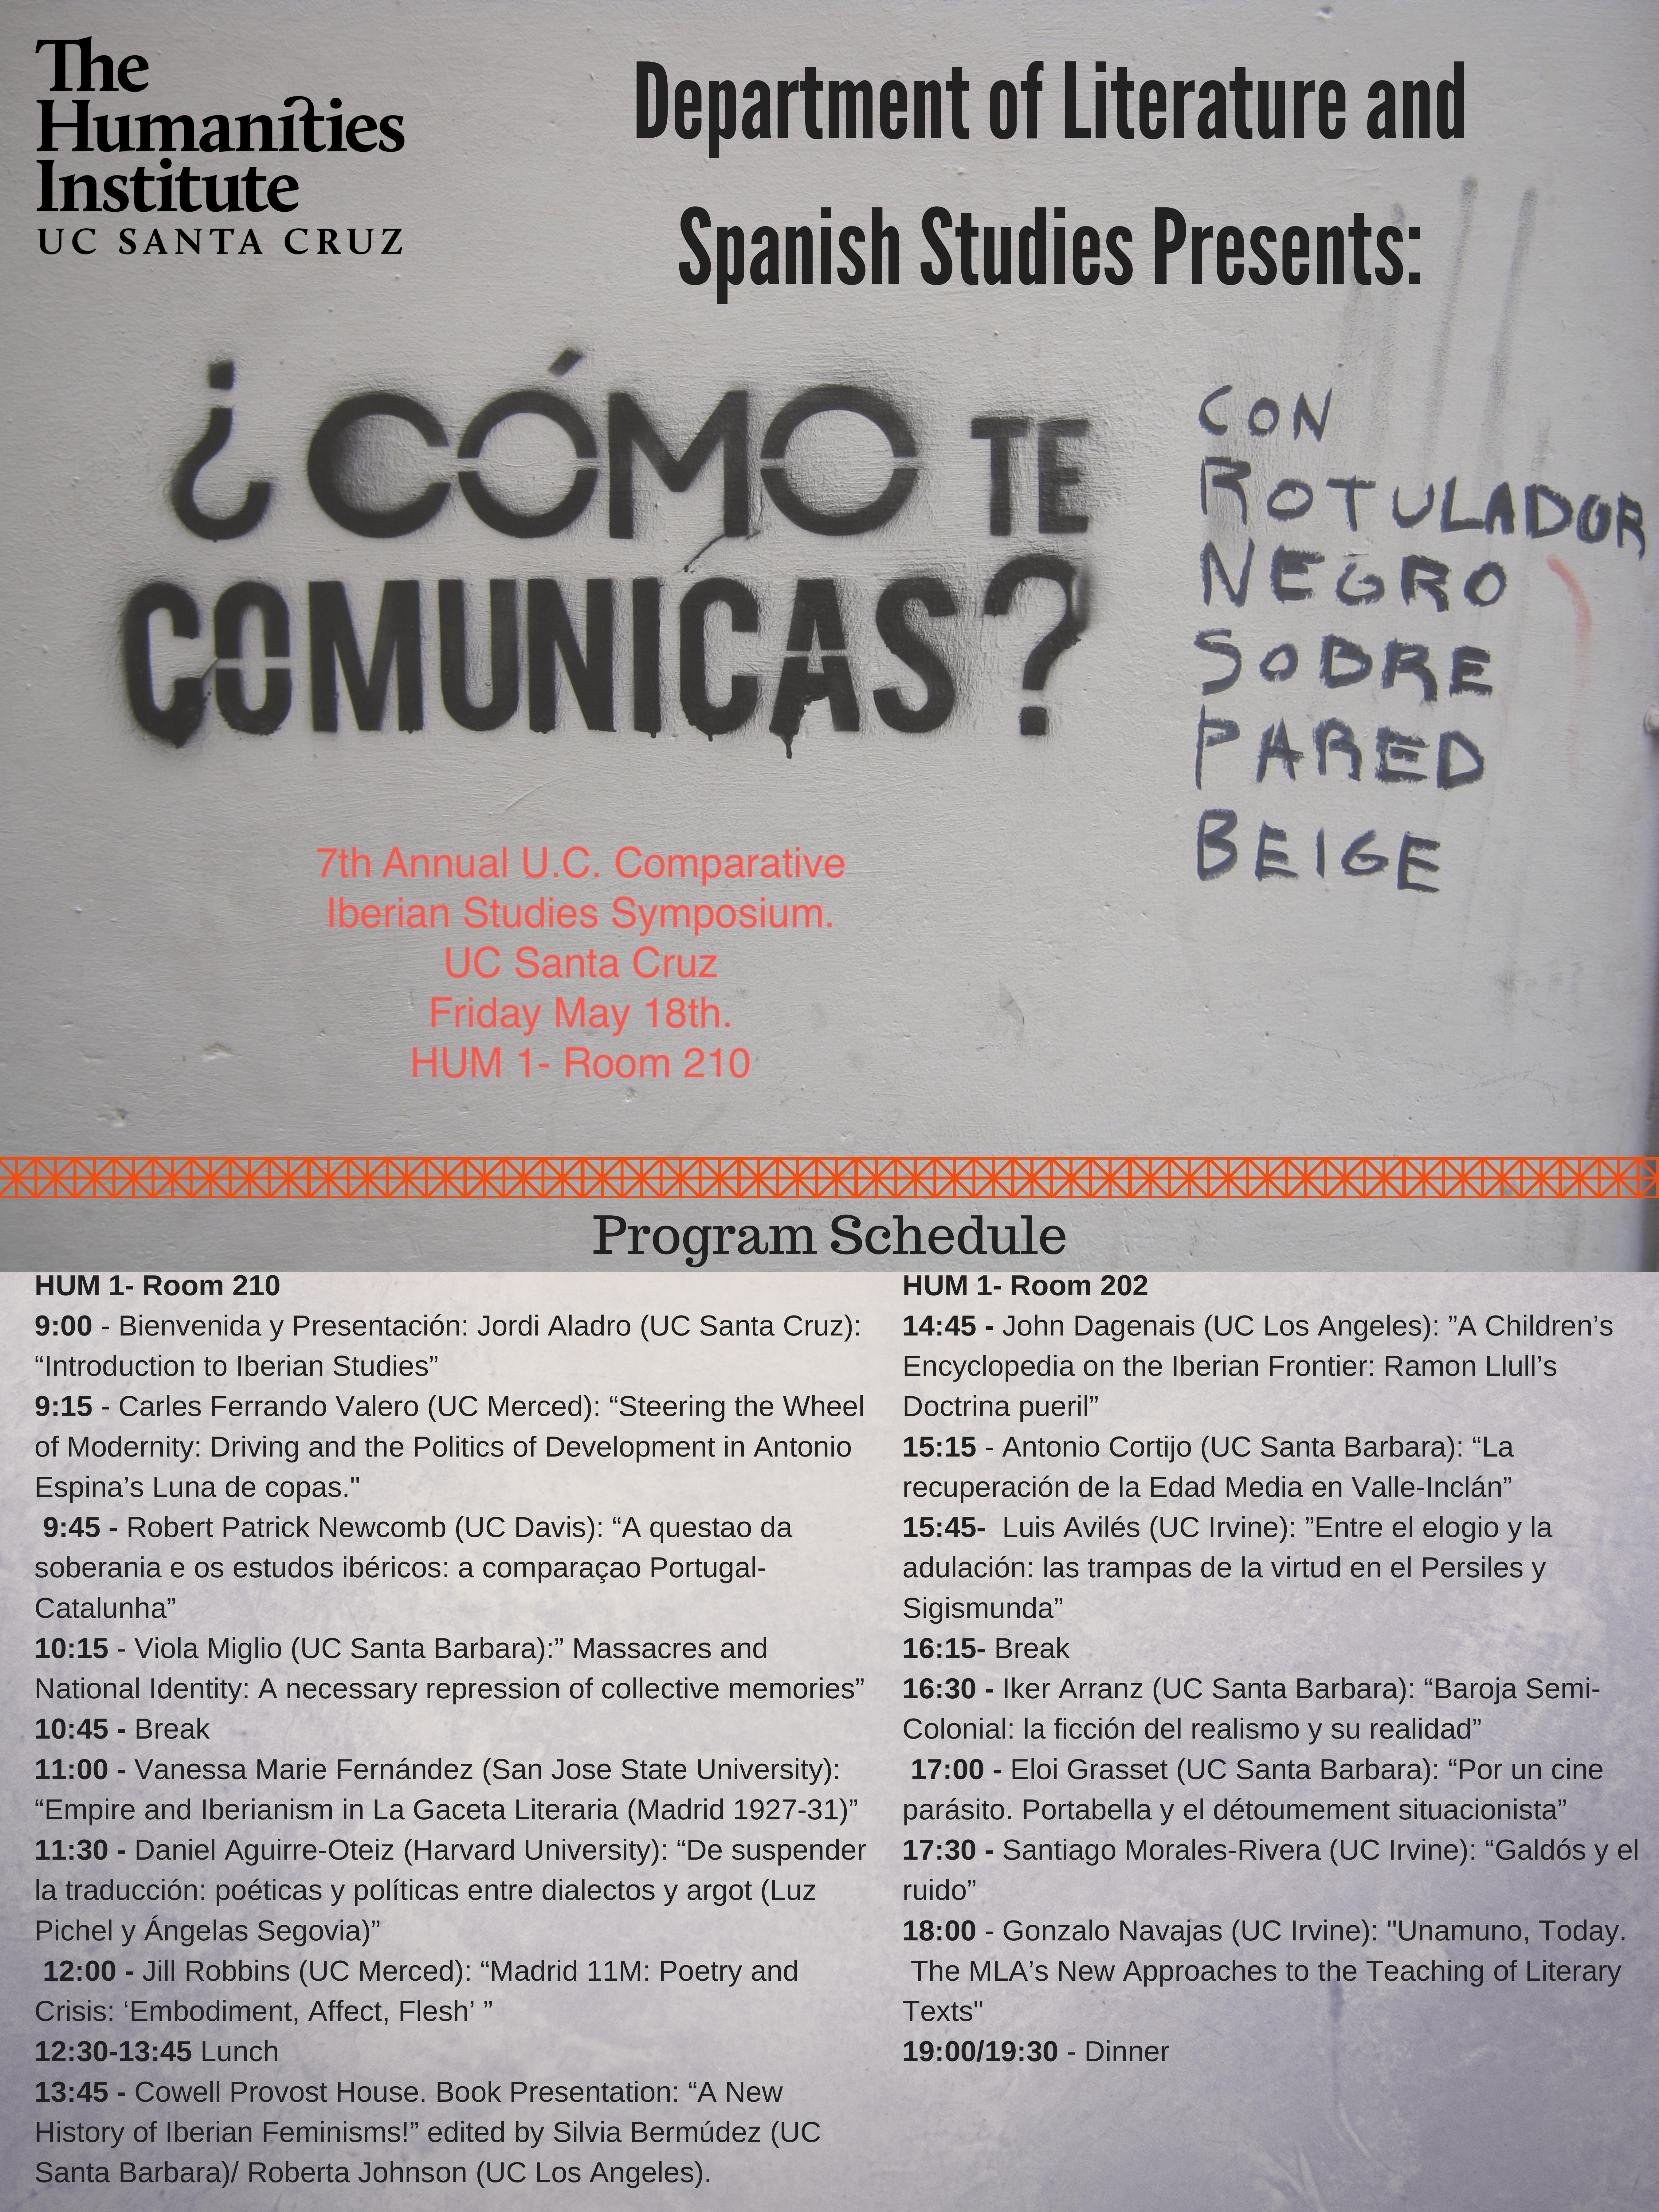 A flyer for the event, and a schedule, is shown.